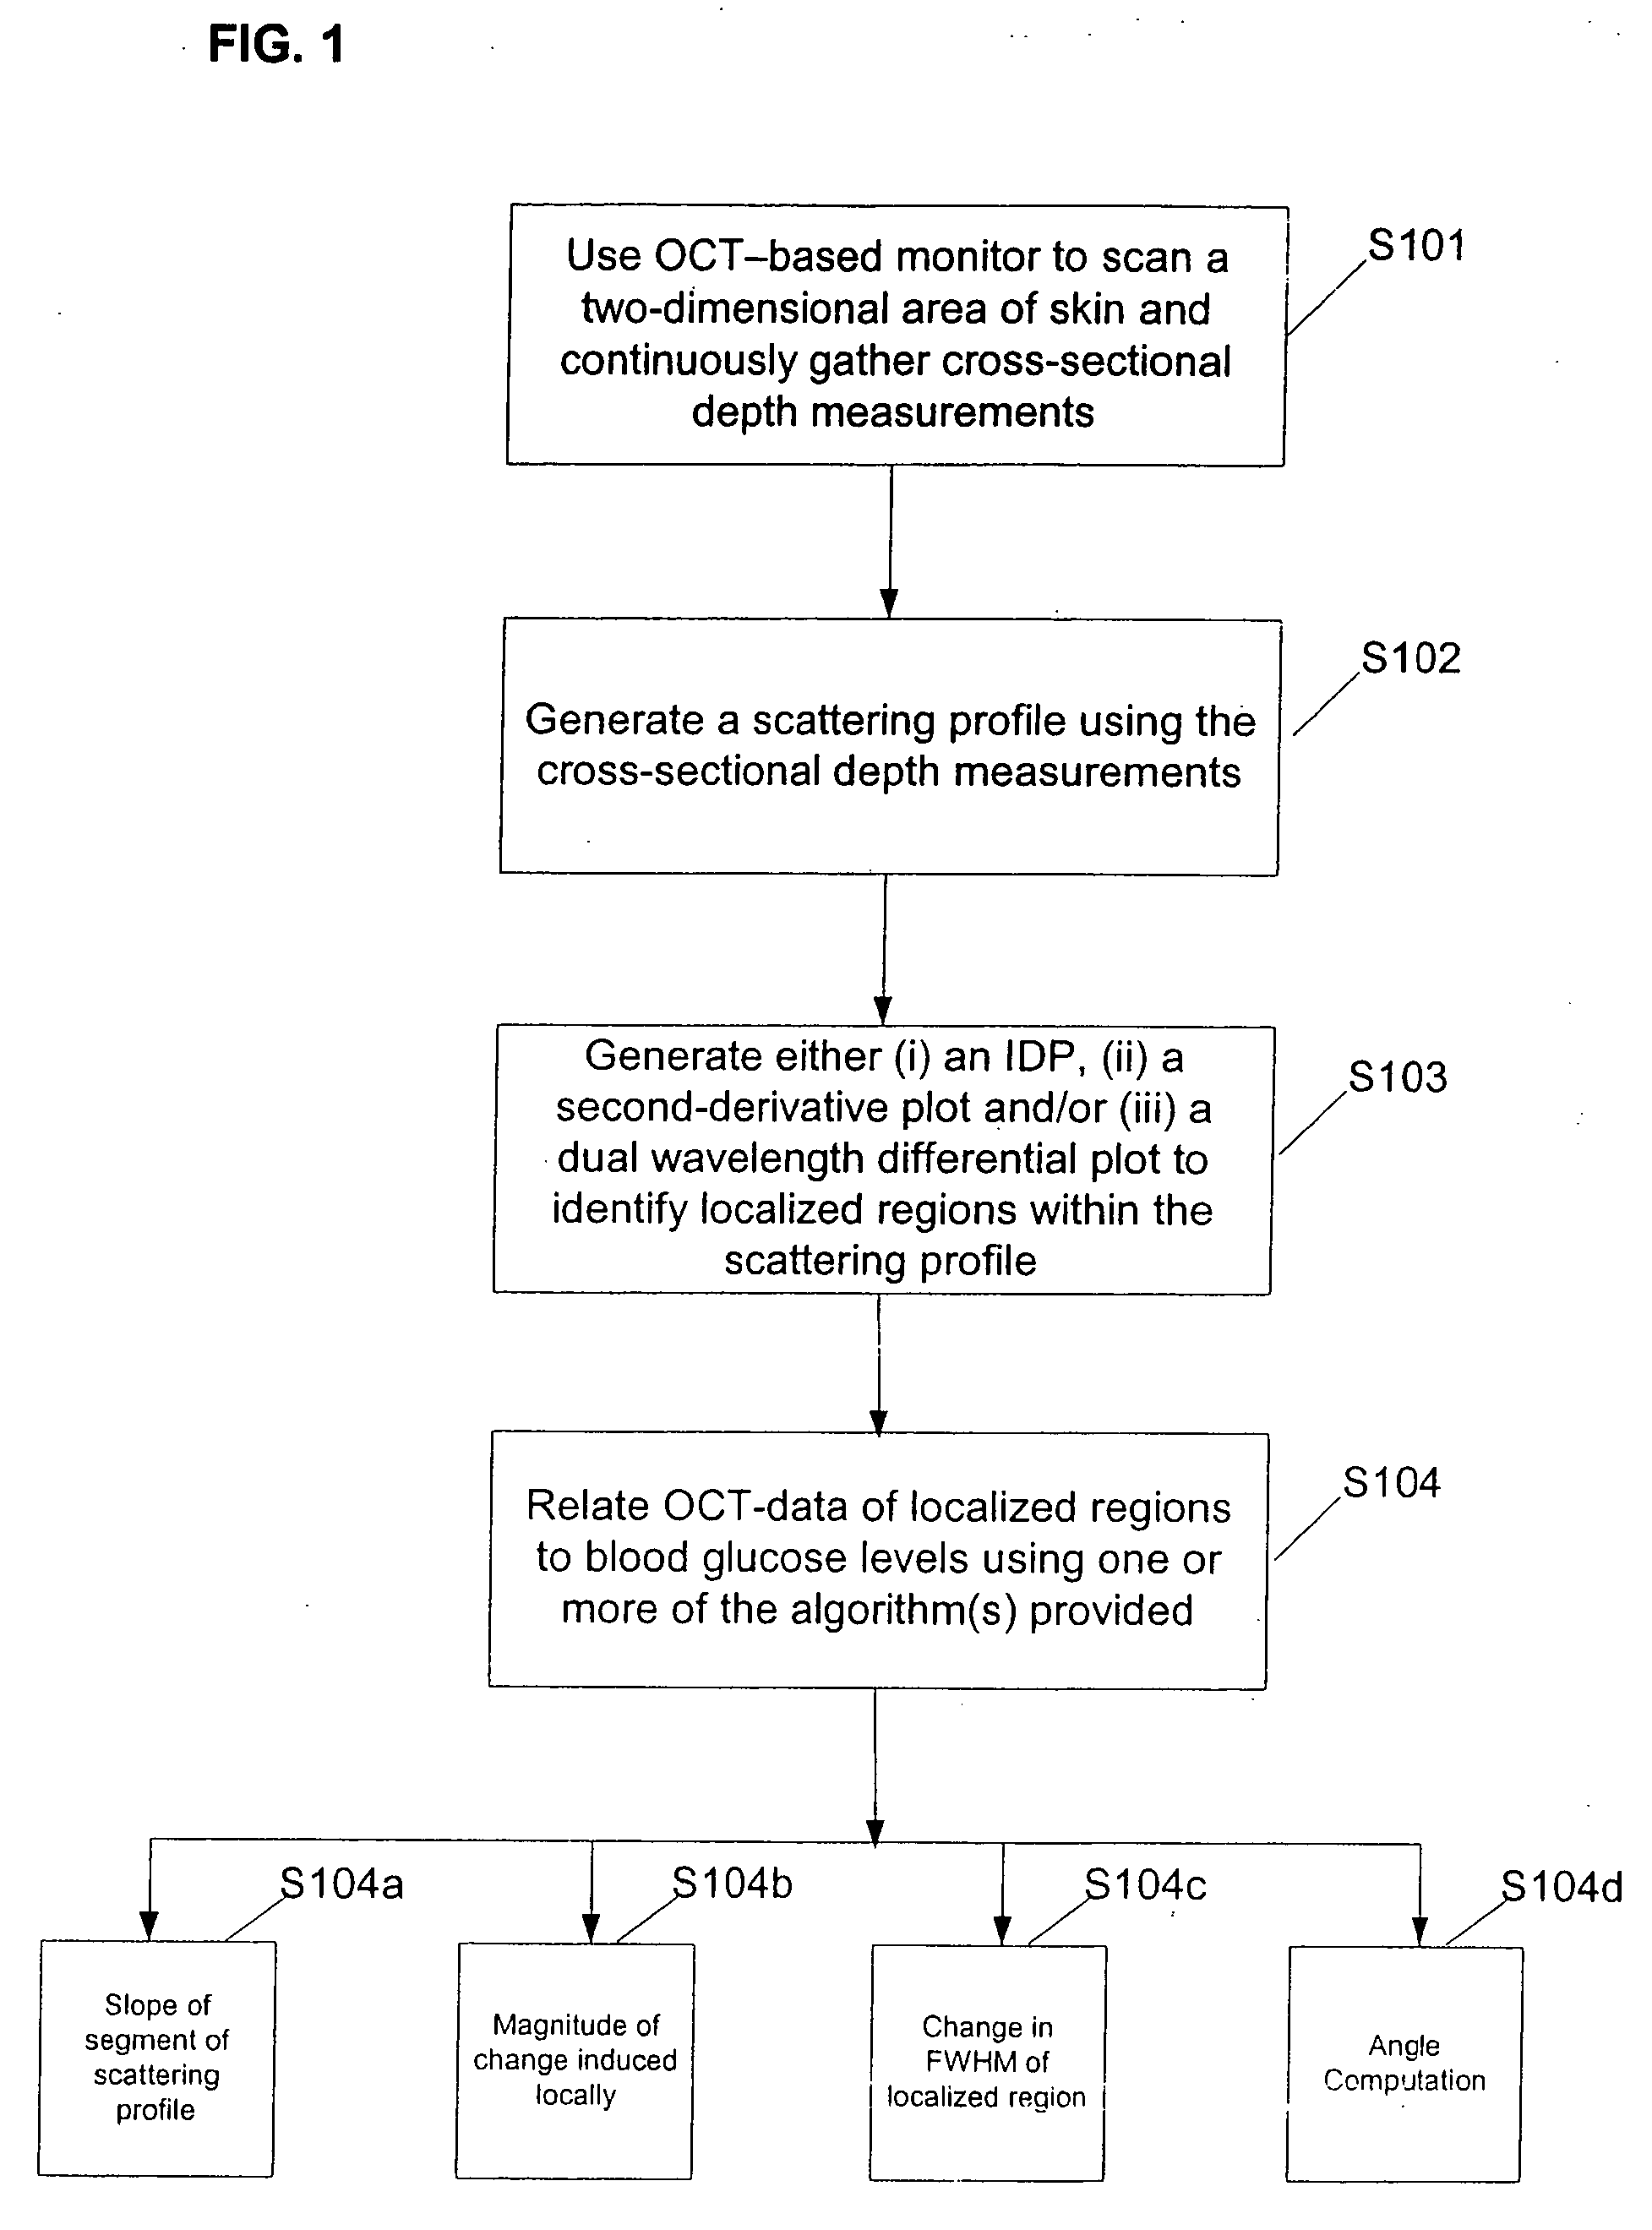 Methods for noninvasively measuring analyte levels in a subject